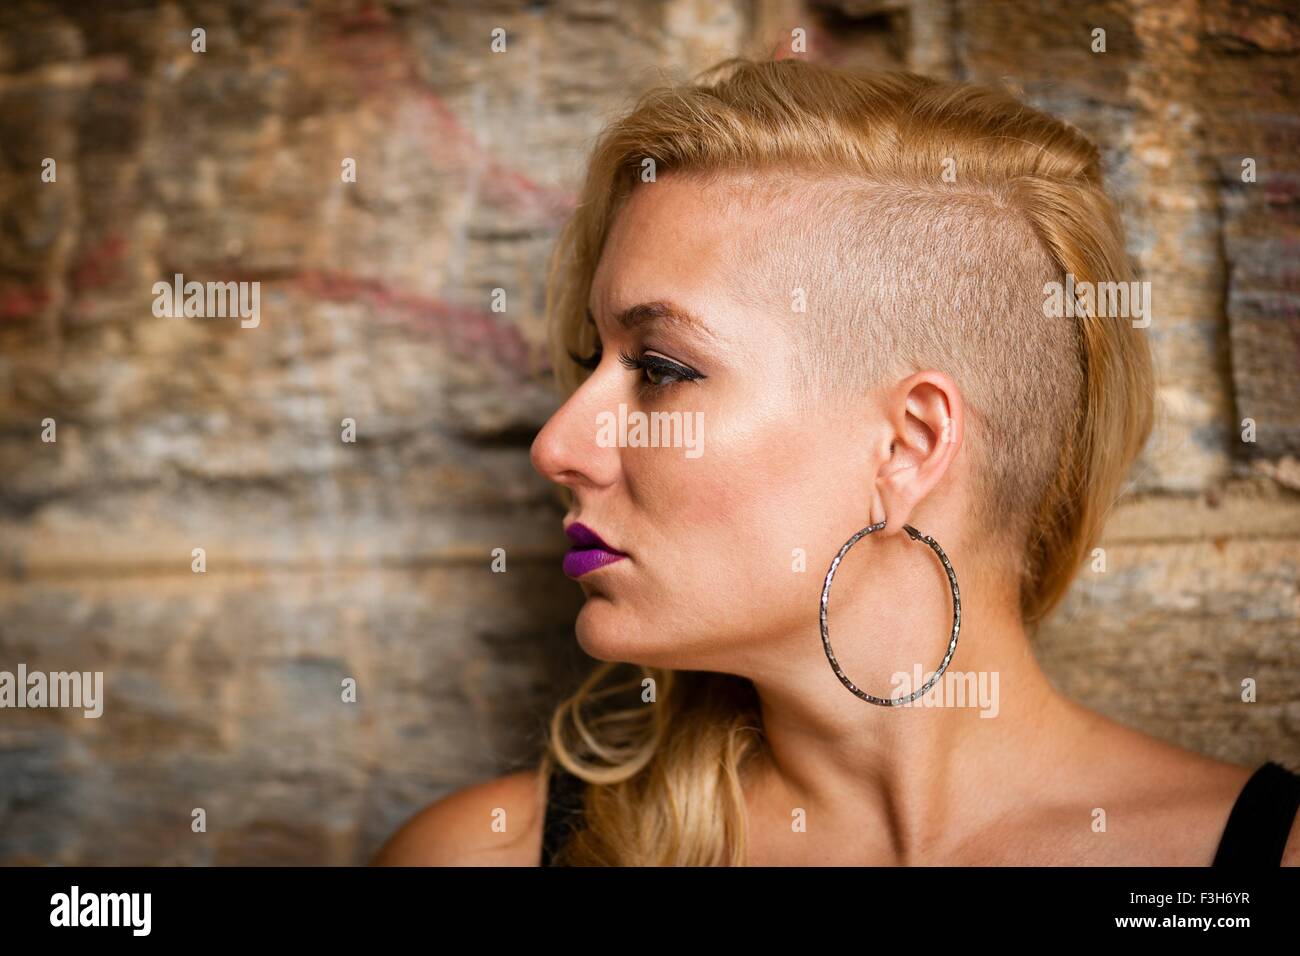 Portrait of mid adult woman with shaved cheveux blonds looking sideways Banque D'Images